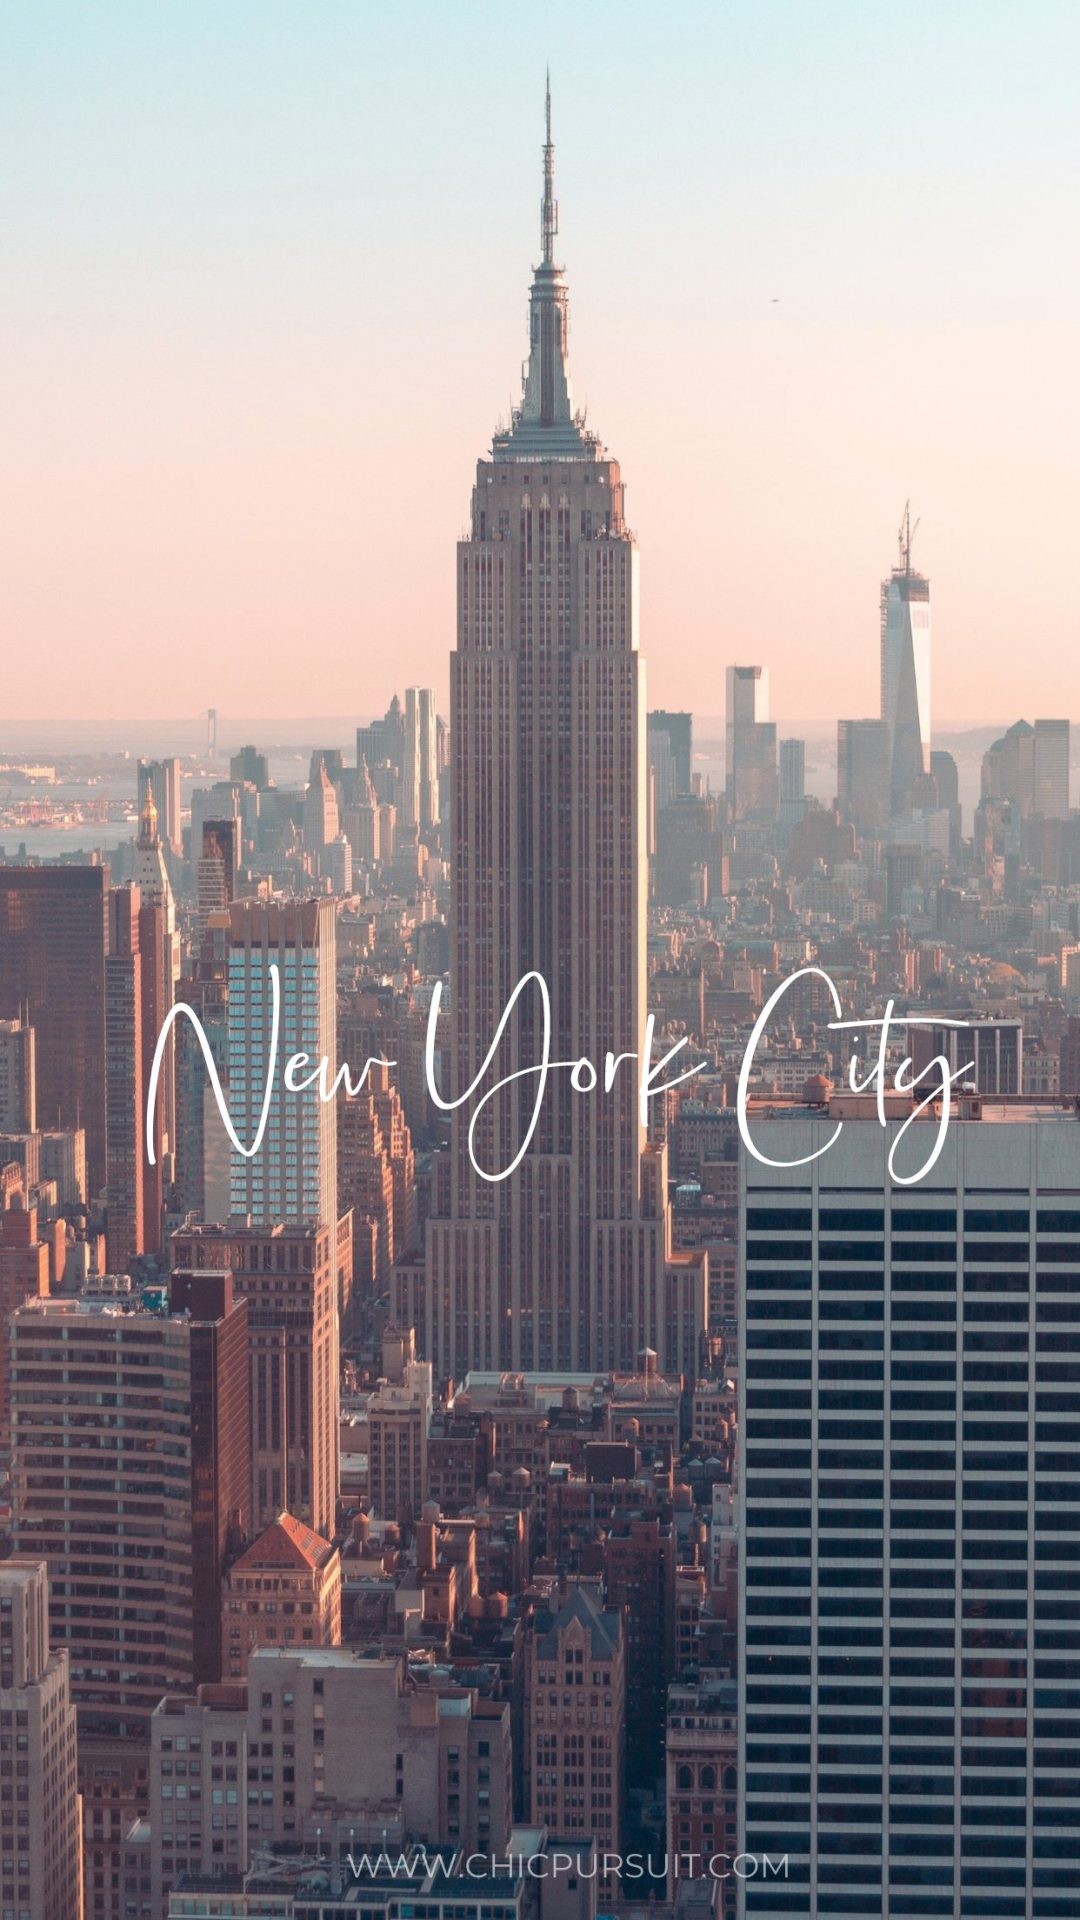 Aesthetic New York Wallpaper For iPhone That You Ll Love